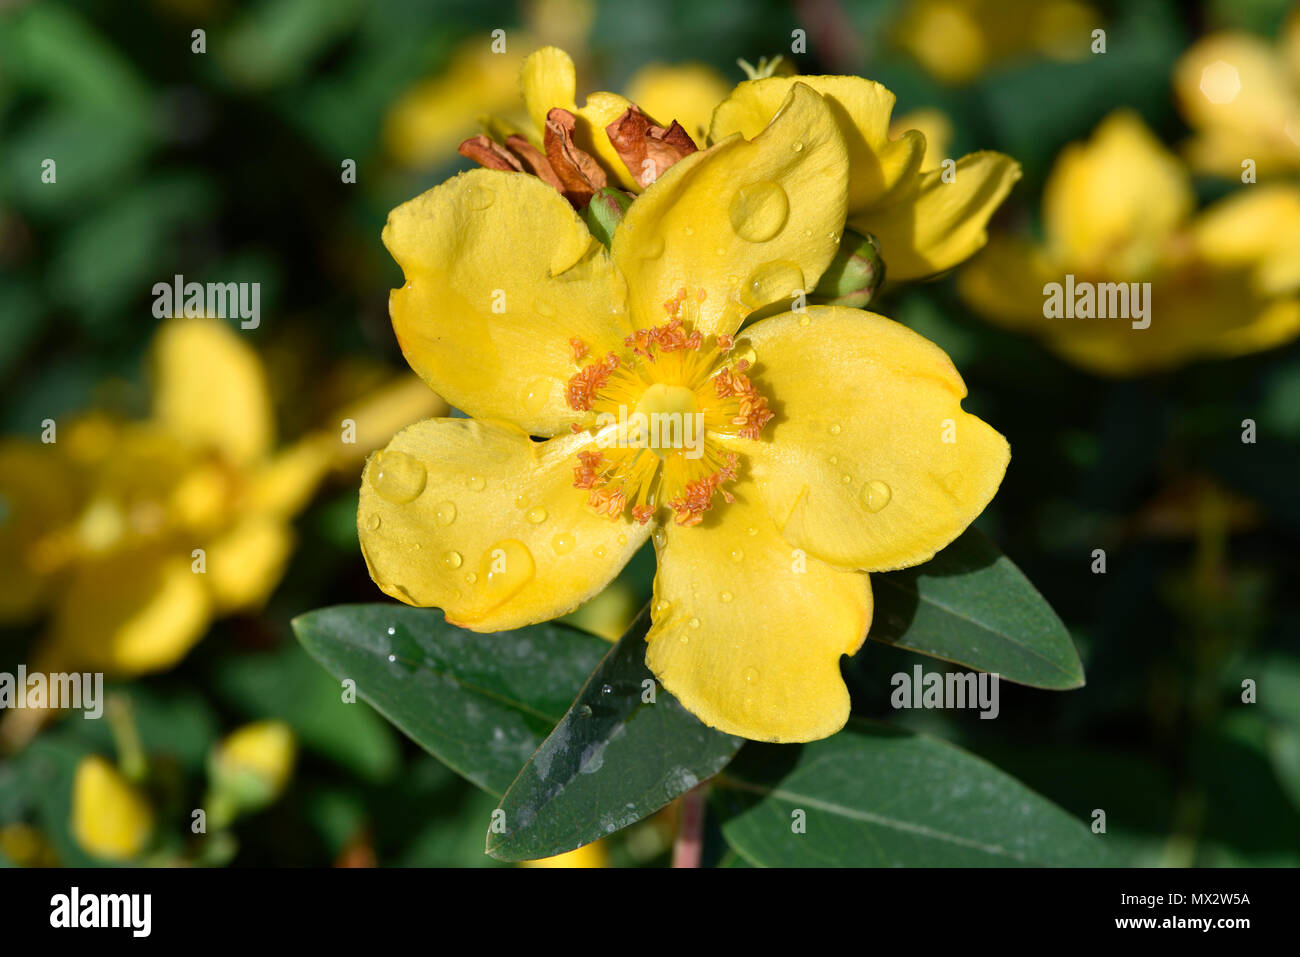 Autumn Buttercup with dewdrops Stock Photo